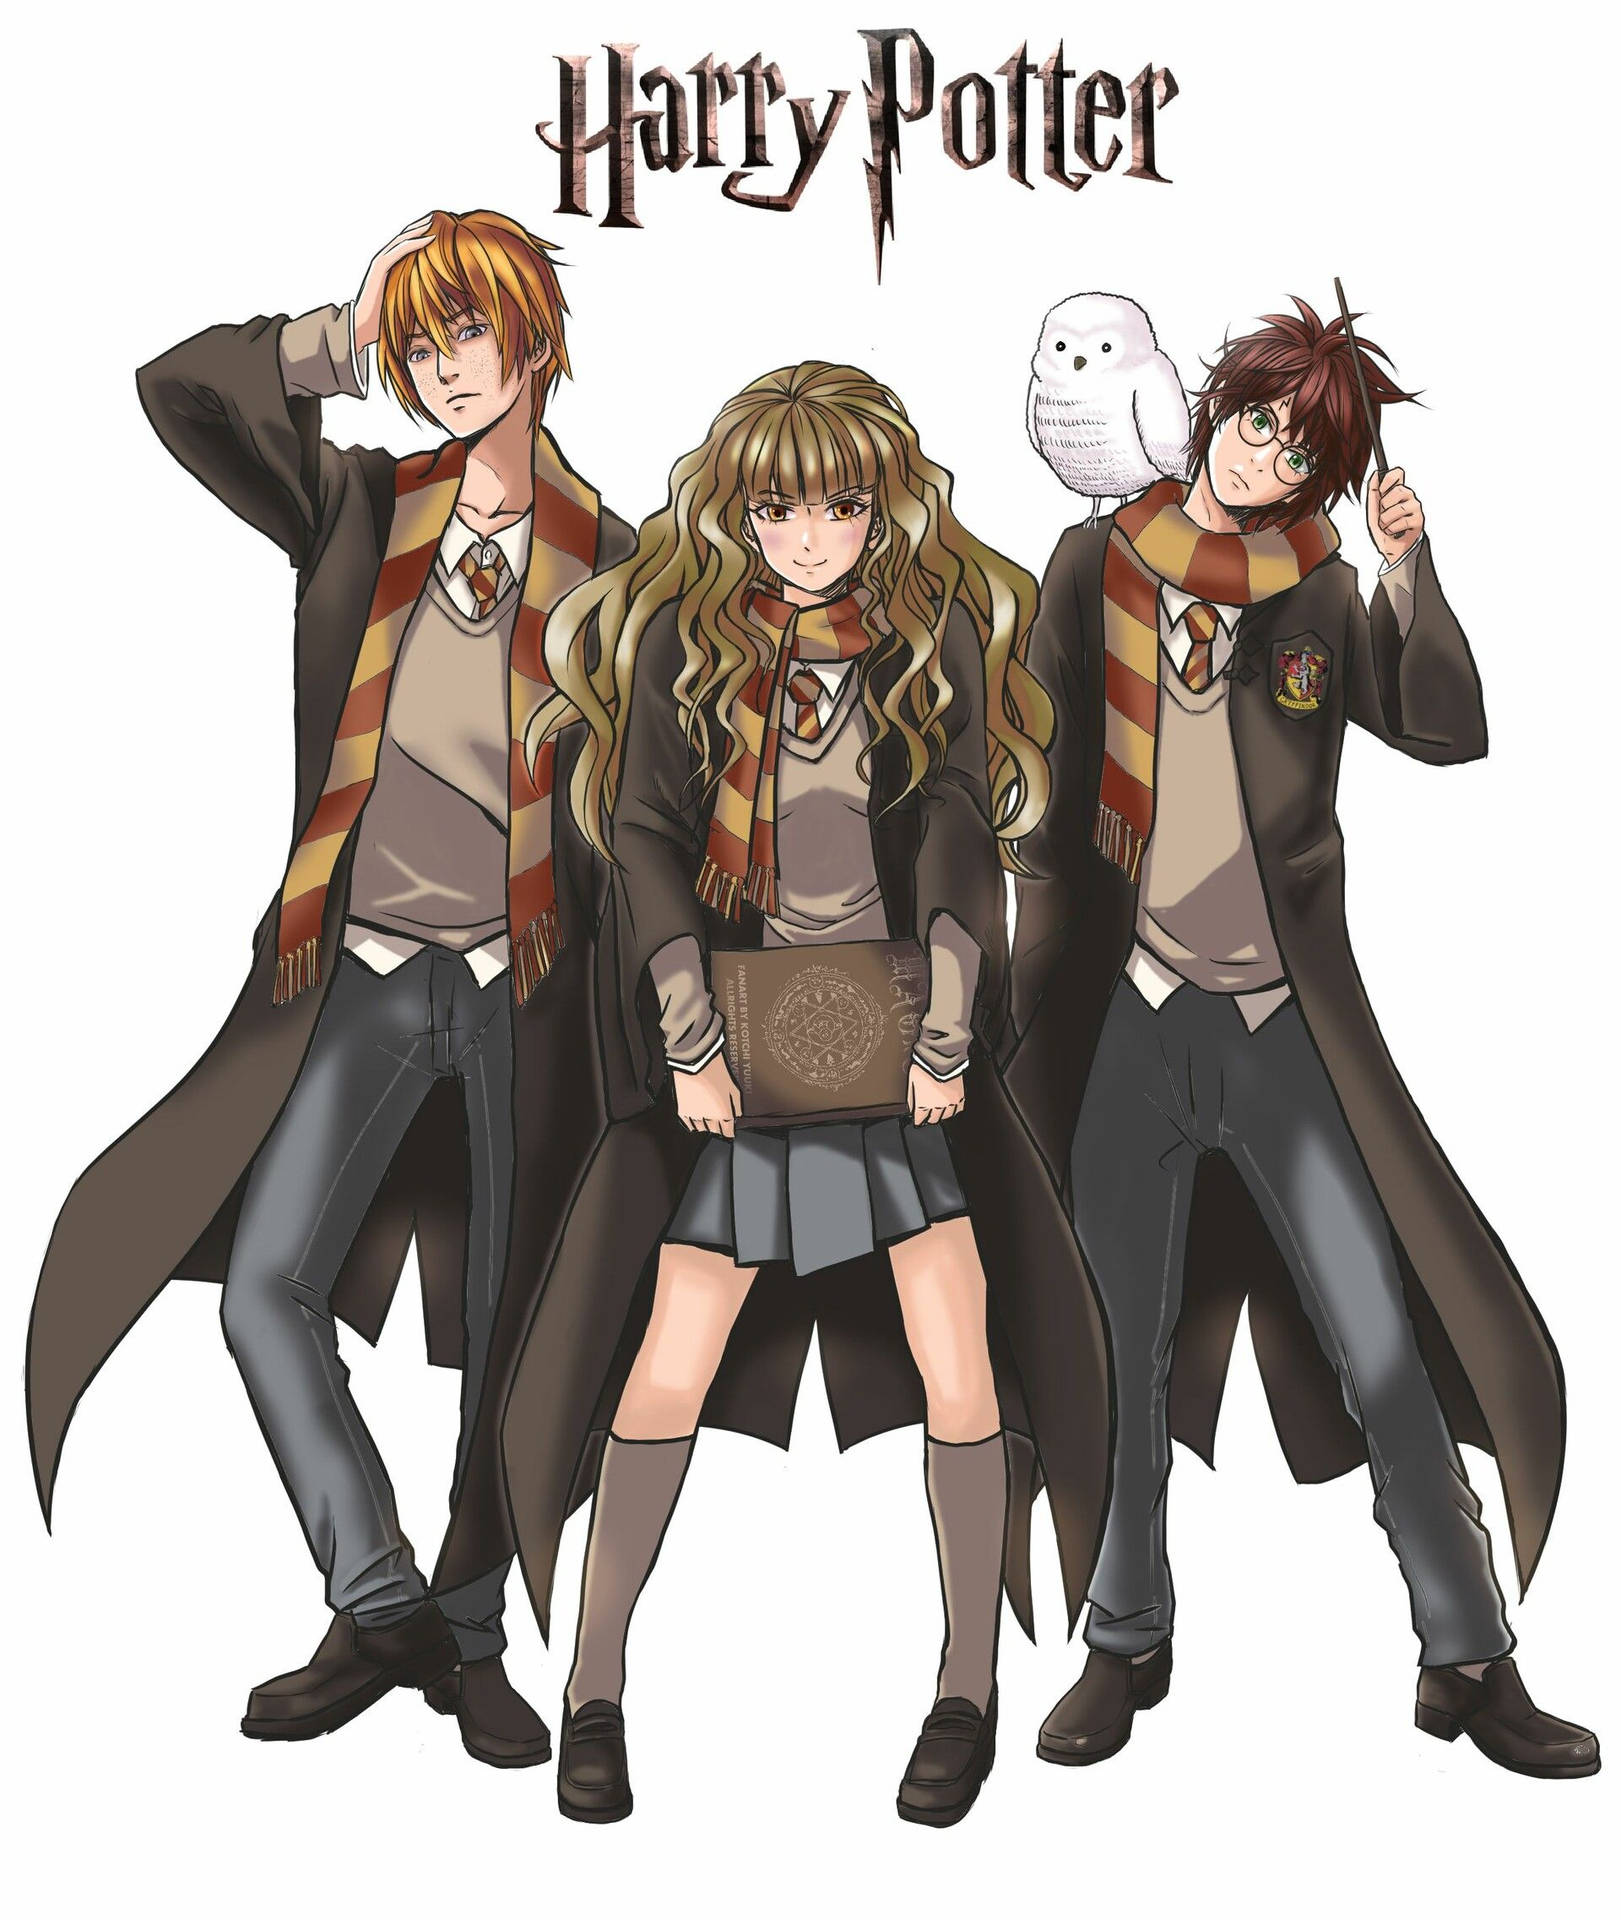 Download Class Photo Harry Potter Anime Wallpaper | Wallpapers.com